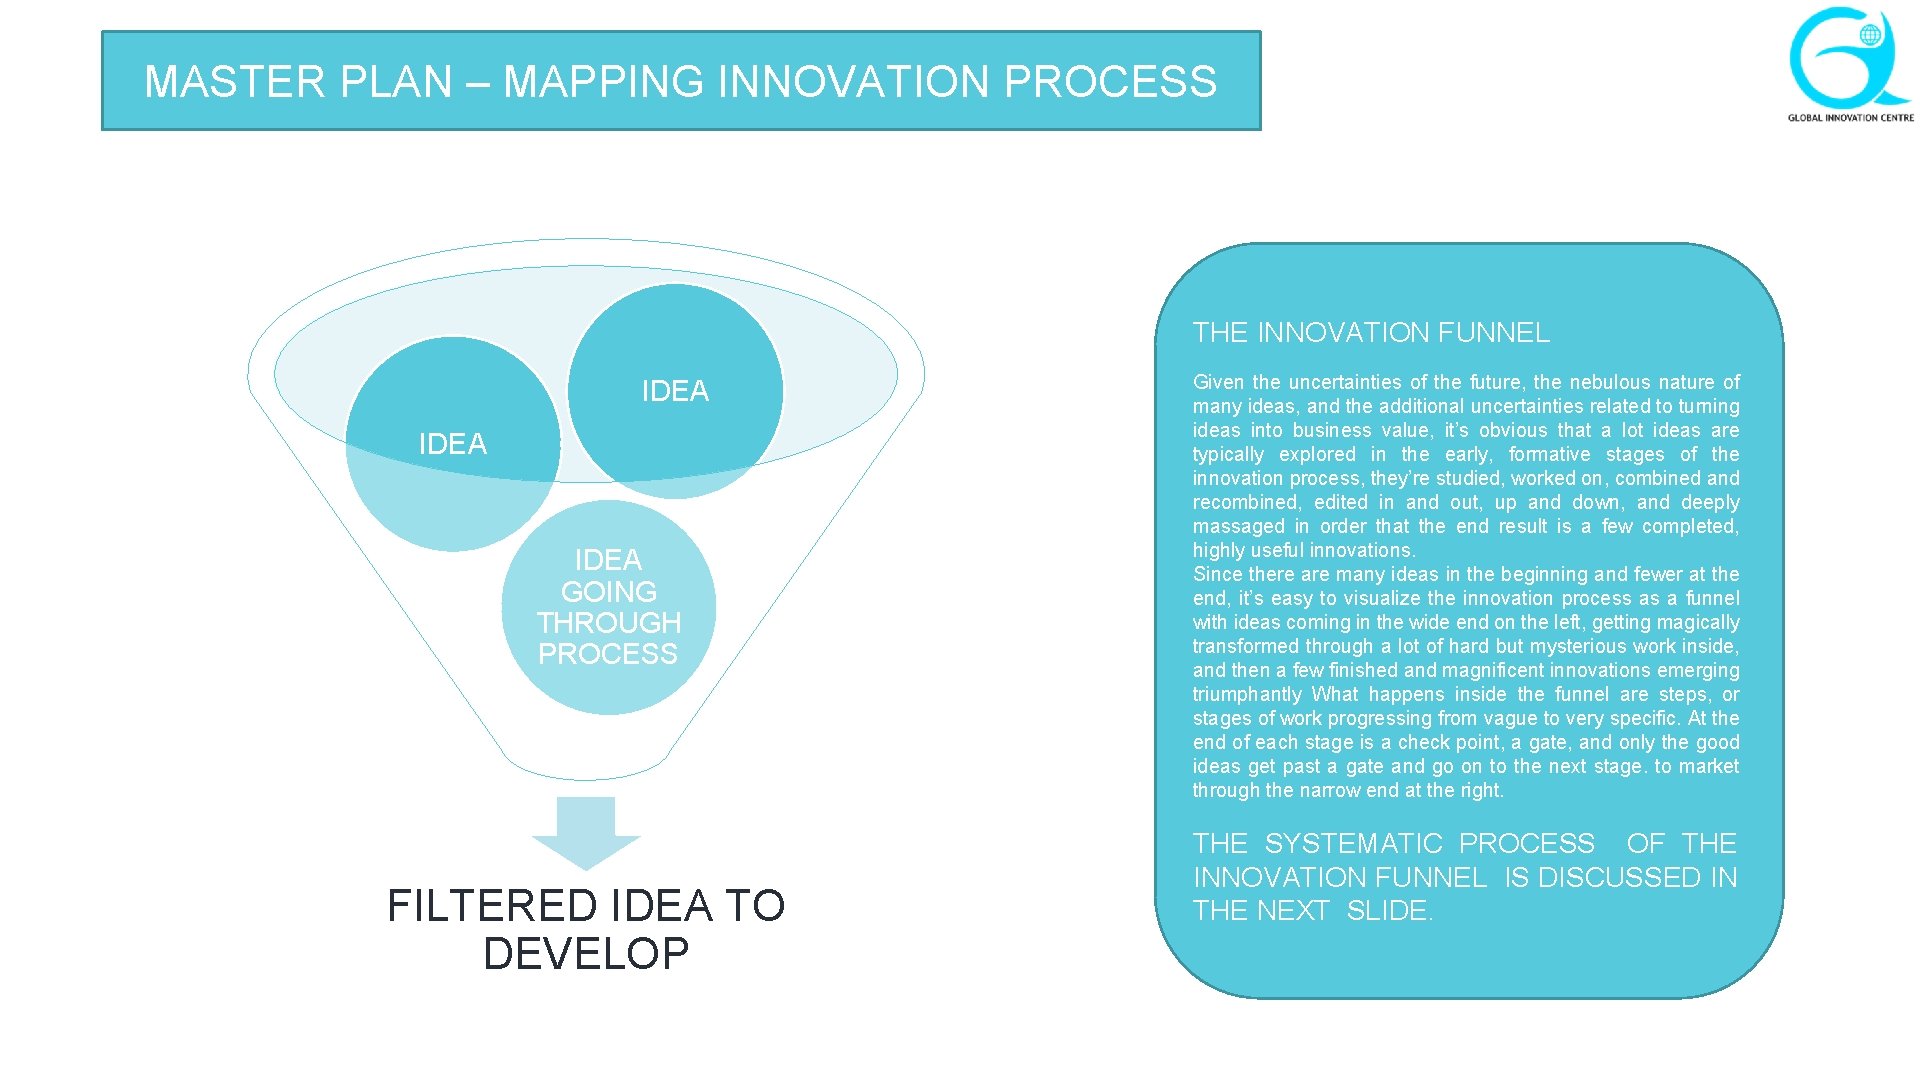 MASTER PLAN – MAPPING INNOVATION PROCESS THE INNOVATION FUNNEL IDEA GOING THROUGH PROCESS FILTERED